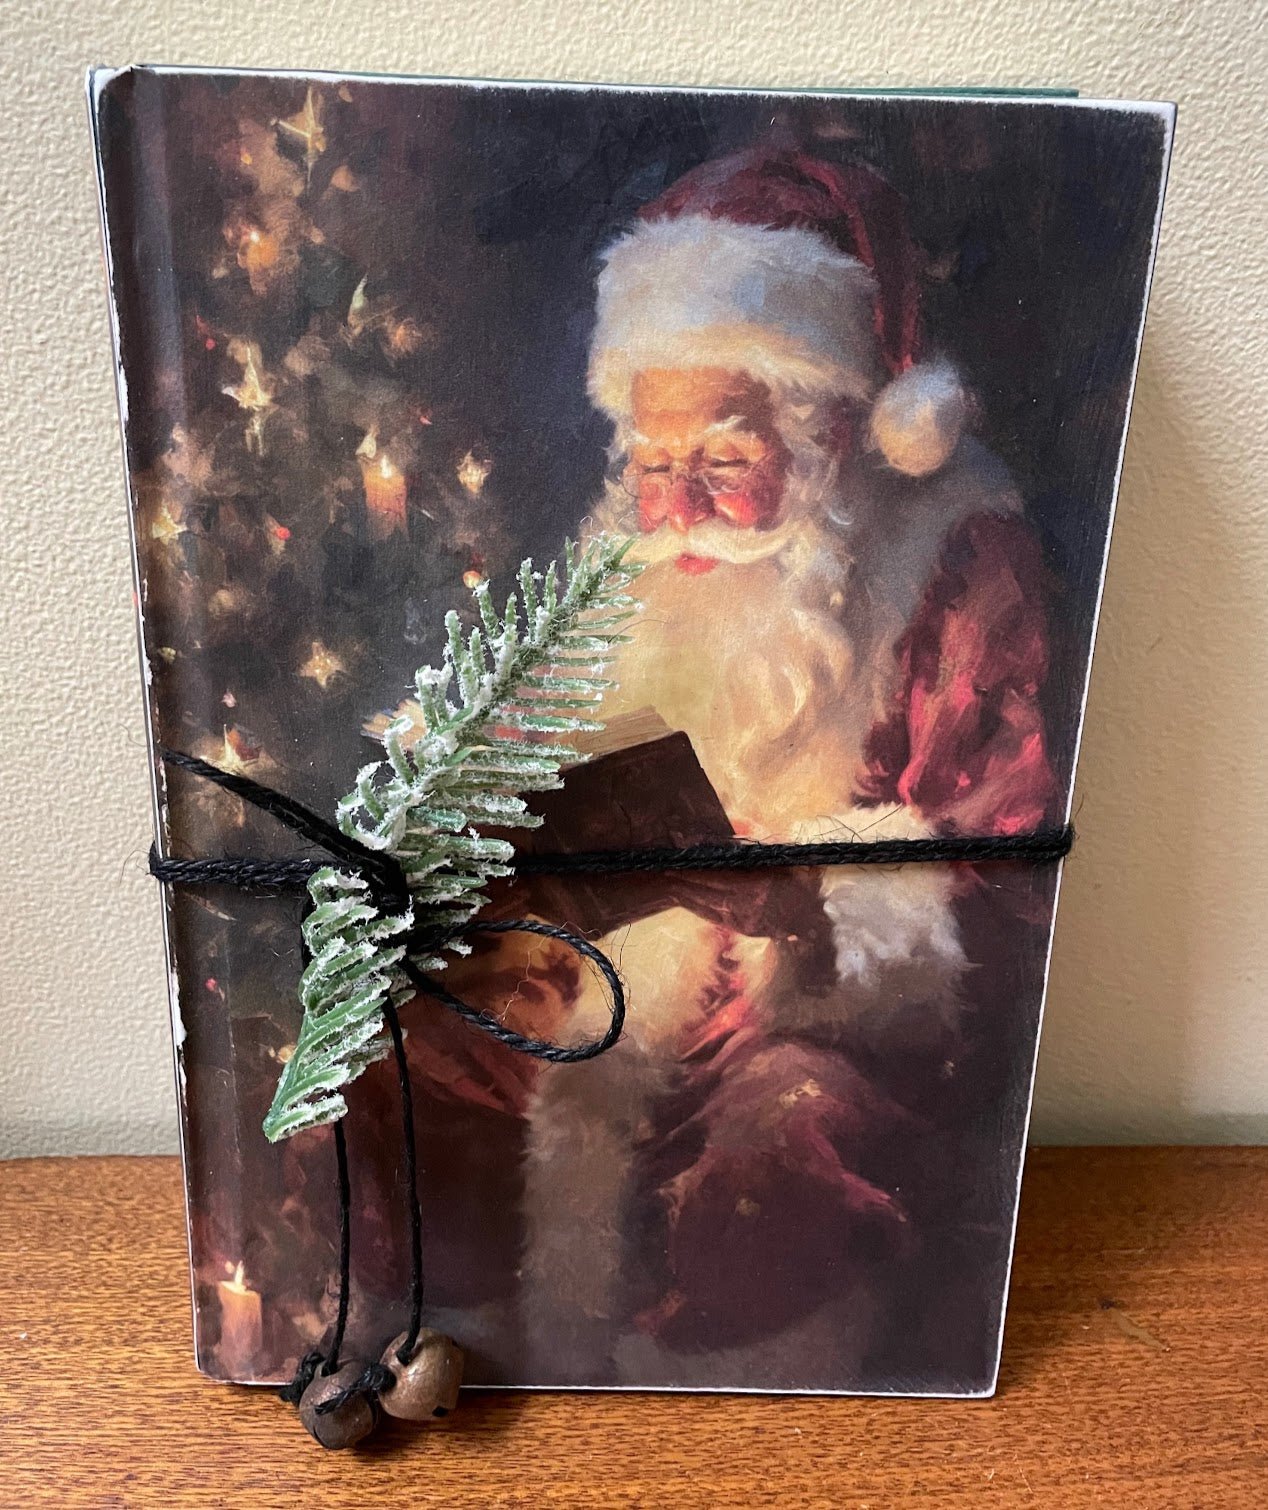 Handcrafted Vintage Look Kris Kringle Holiday Book - The Primitive Pineapple Collection